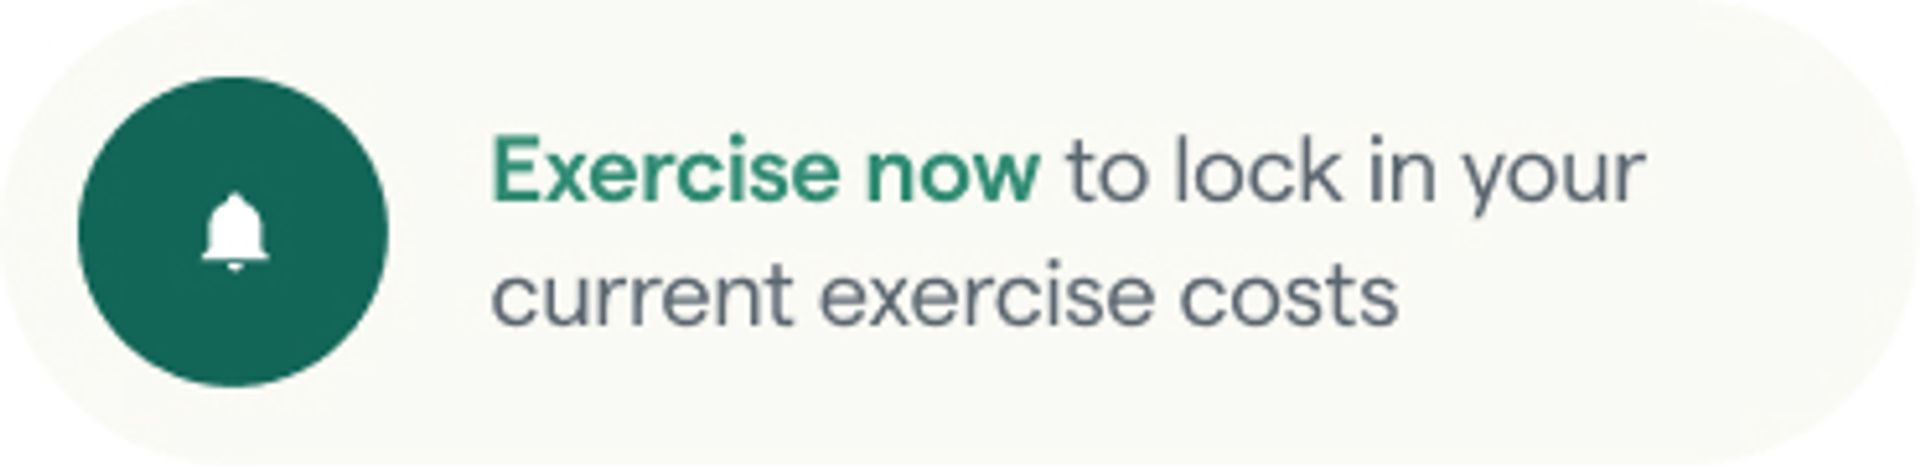 Exercise now to lock in your current exercise costs. 